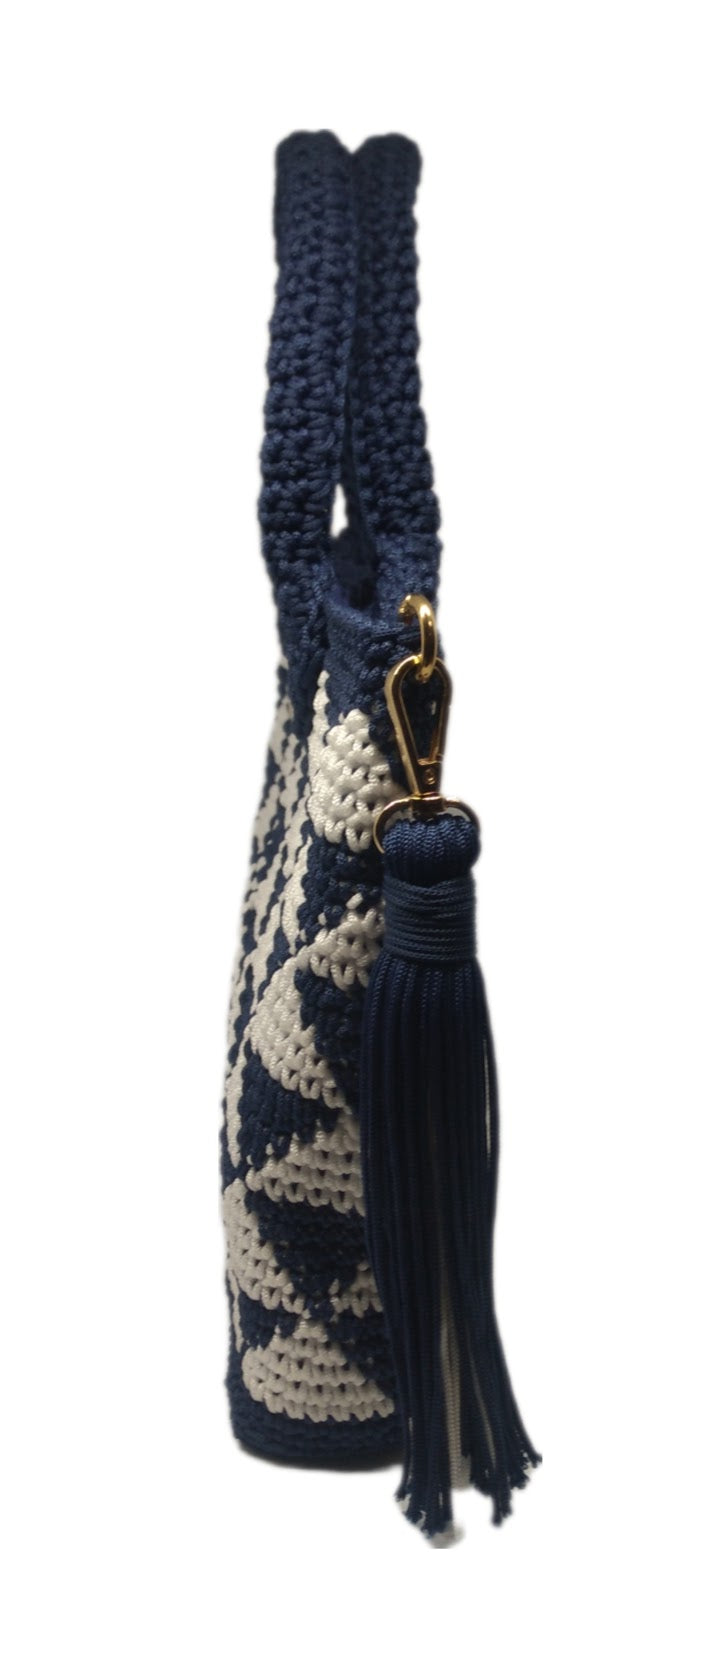 side view of Blue and white crochet geo print handbag with large tassel